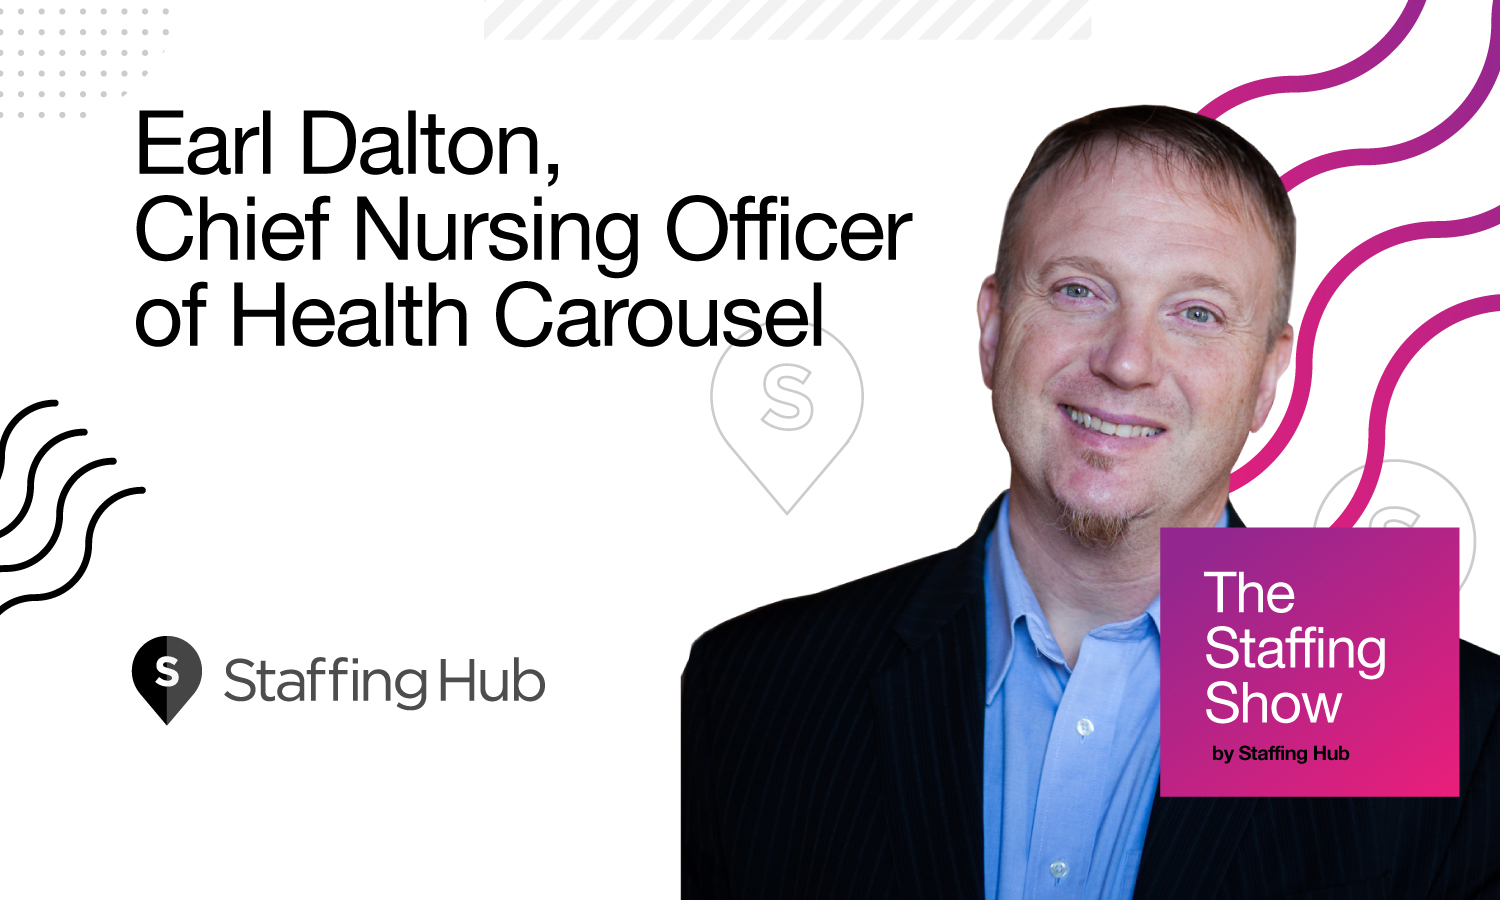 What Gretzky Can Teach Staffing Firms About Coaching Their Travel Nurses: An Interview with Health Carousel’s CNO Earl Dalton